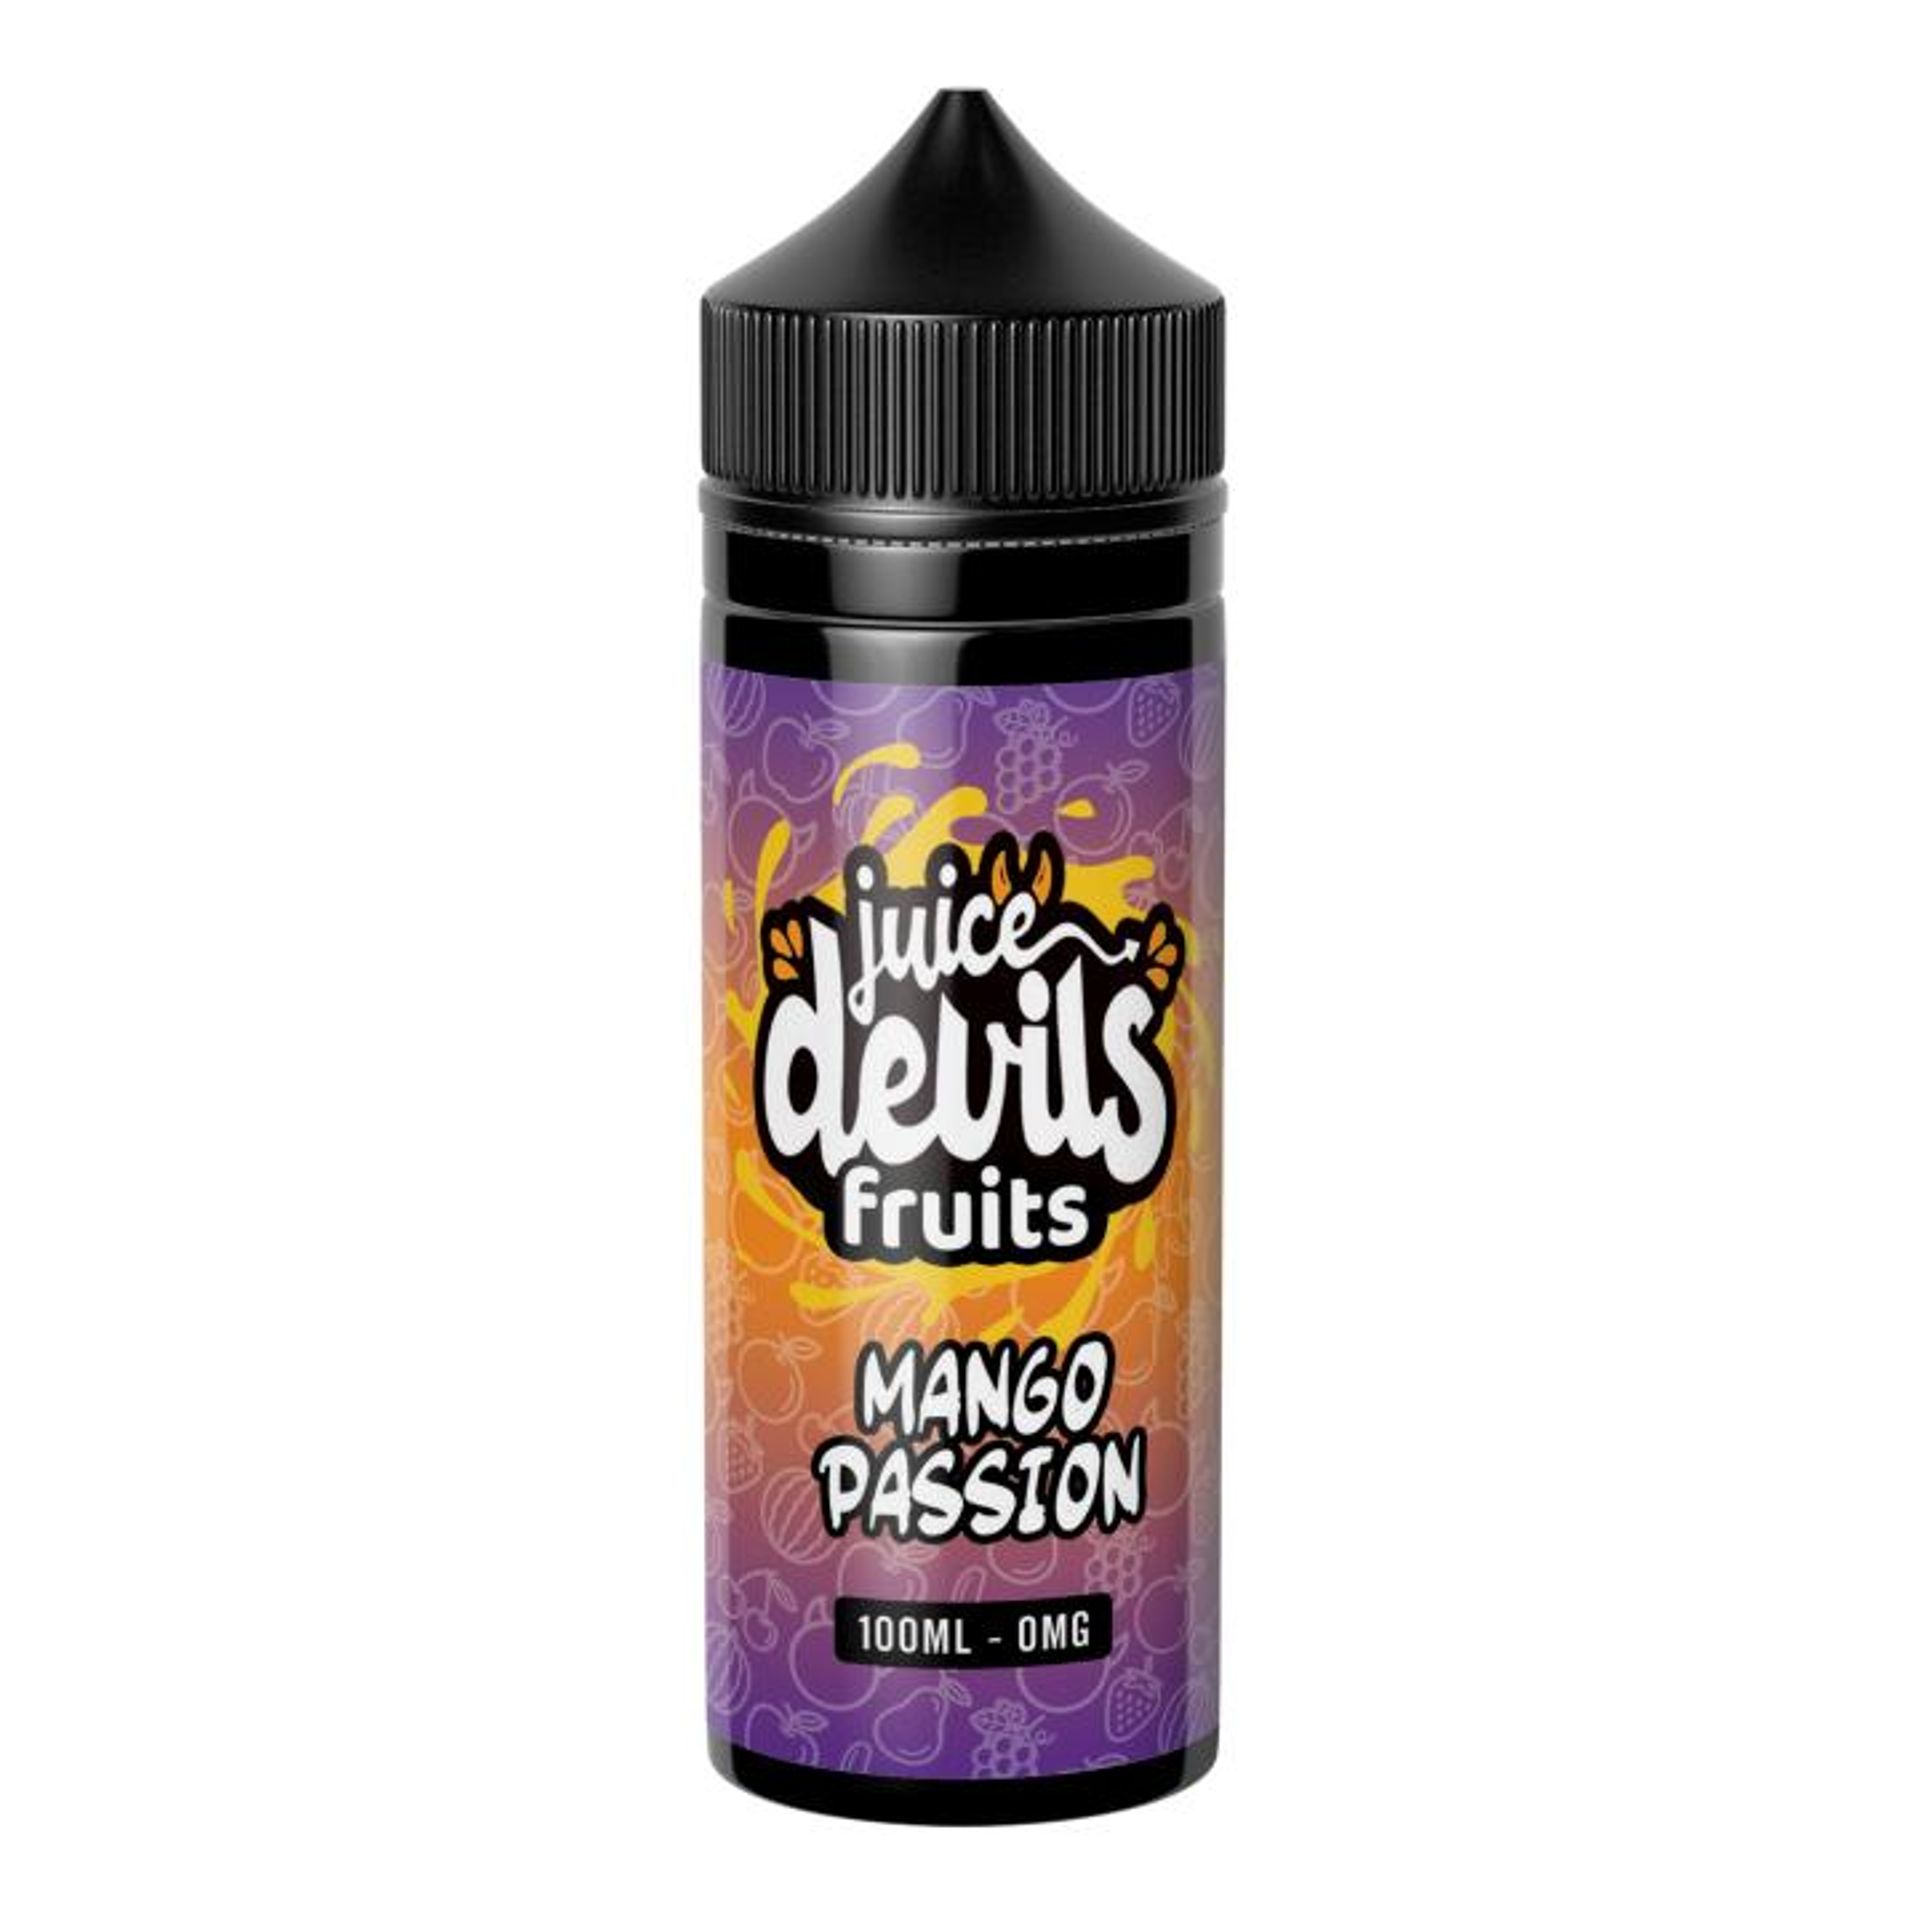 Image of Mango Passion by Juice Devils